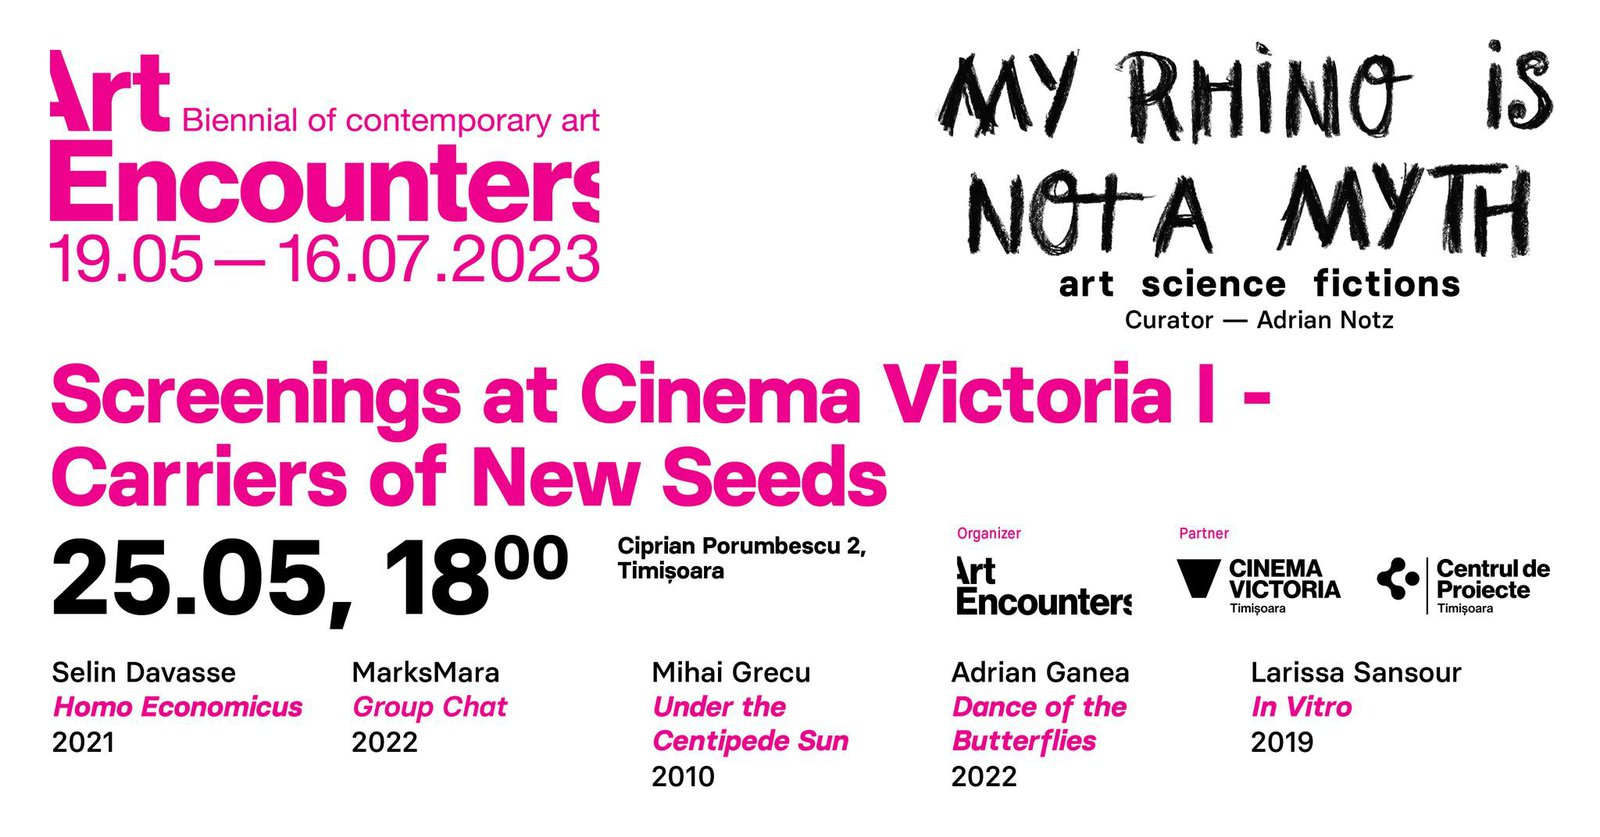 Screenings at Cinema Victoria I - Carries of New Seeds, May 25, 2023